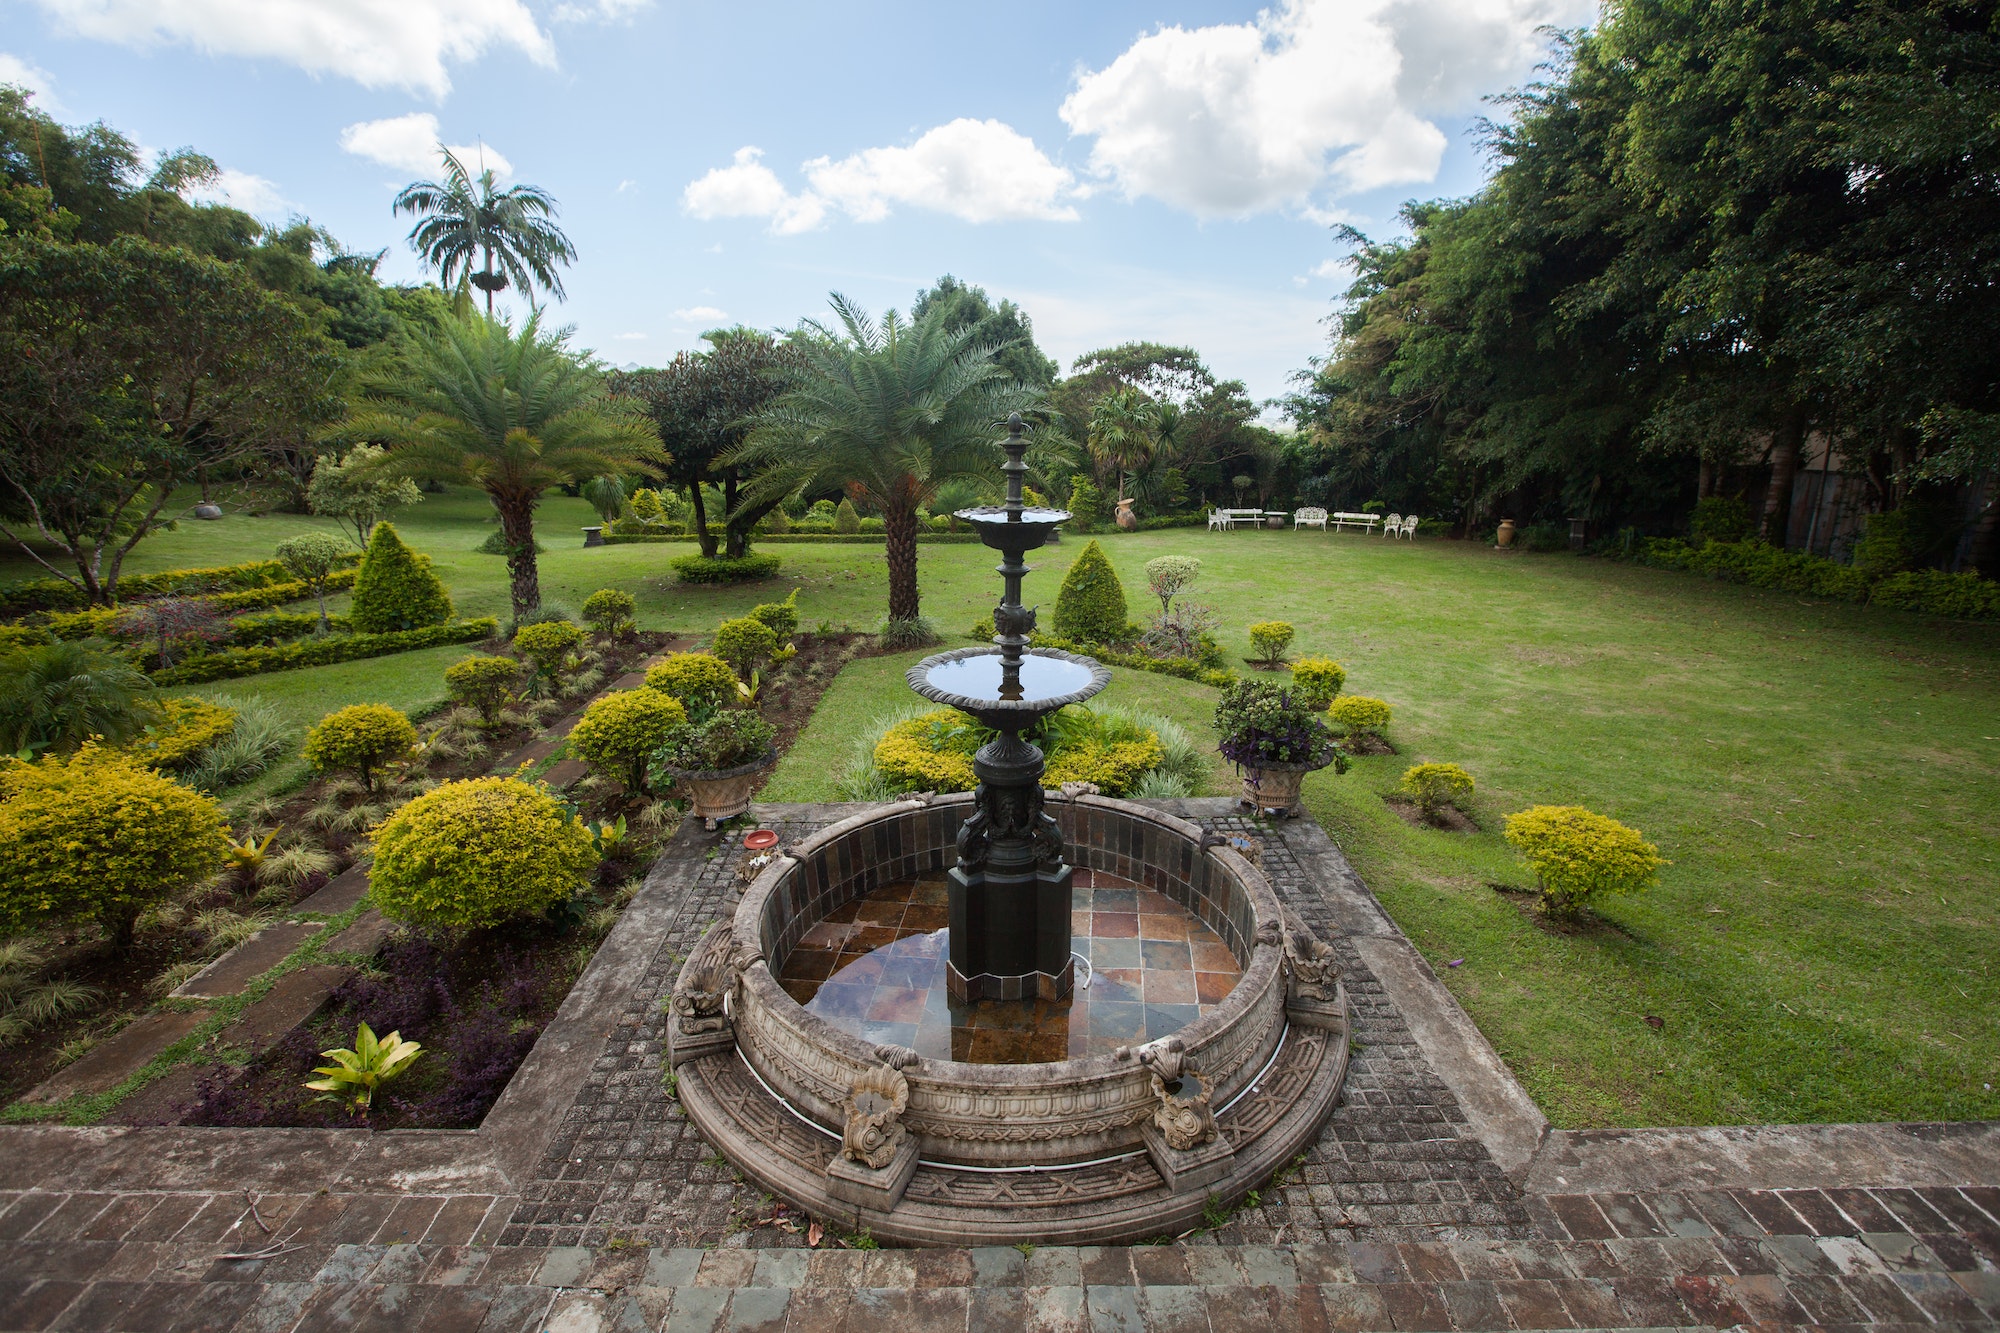 Fountain garden and palm trees